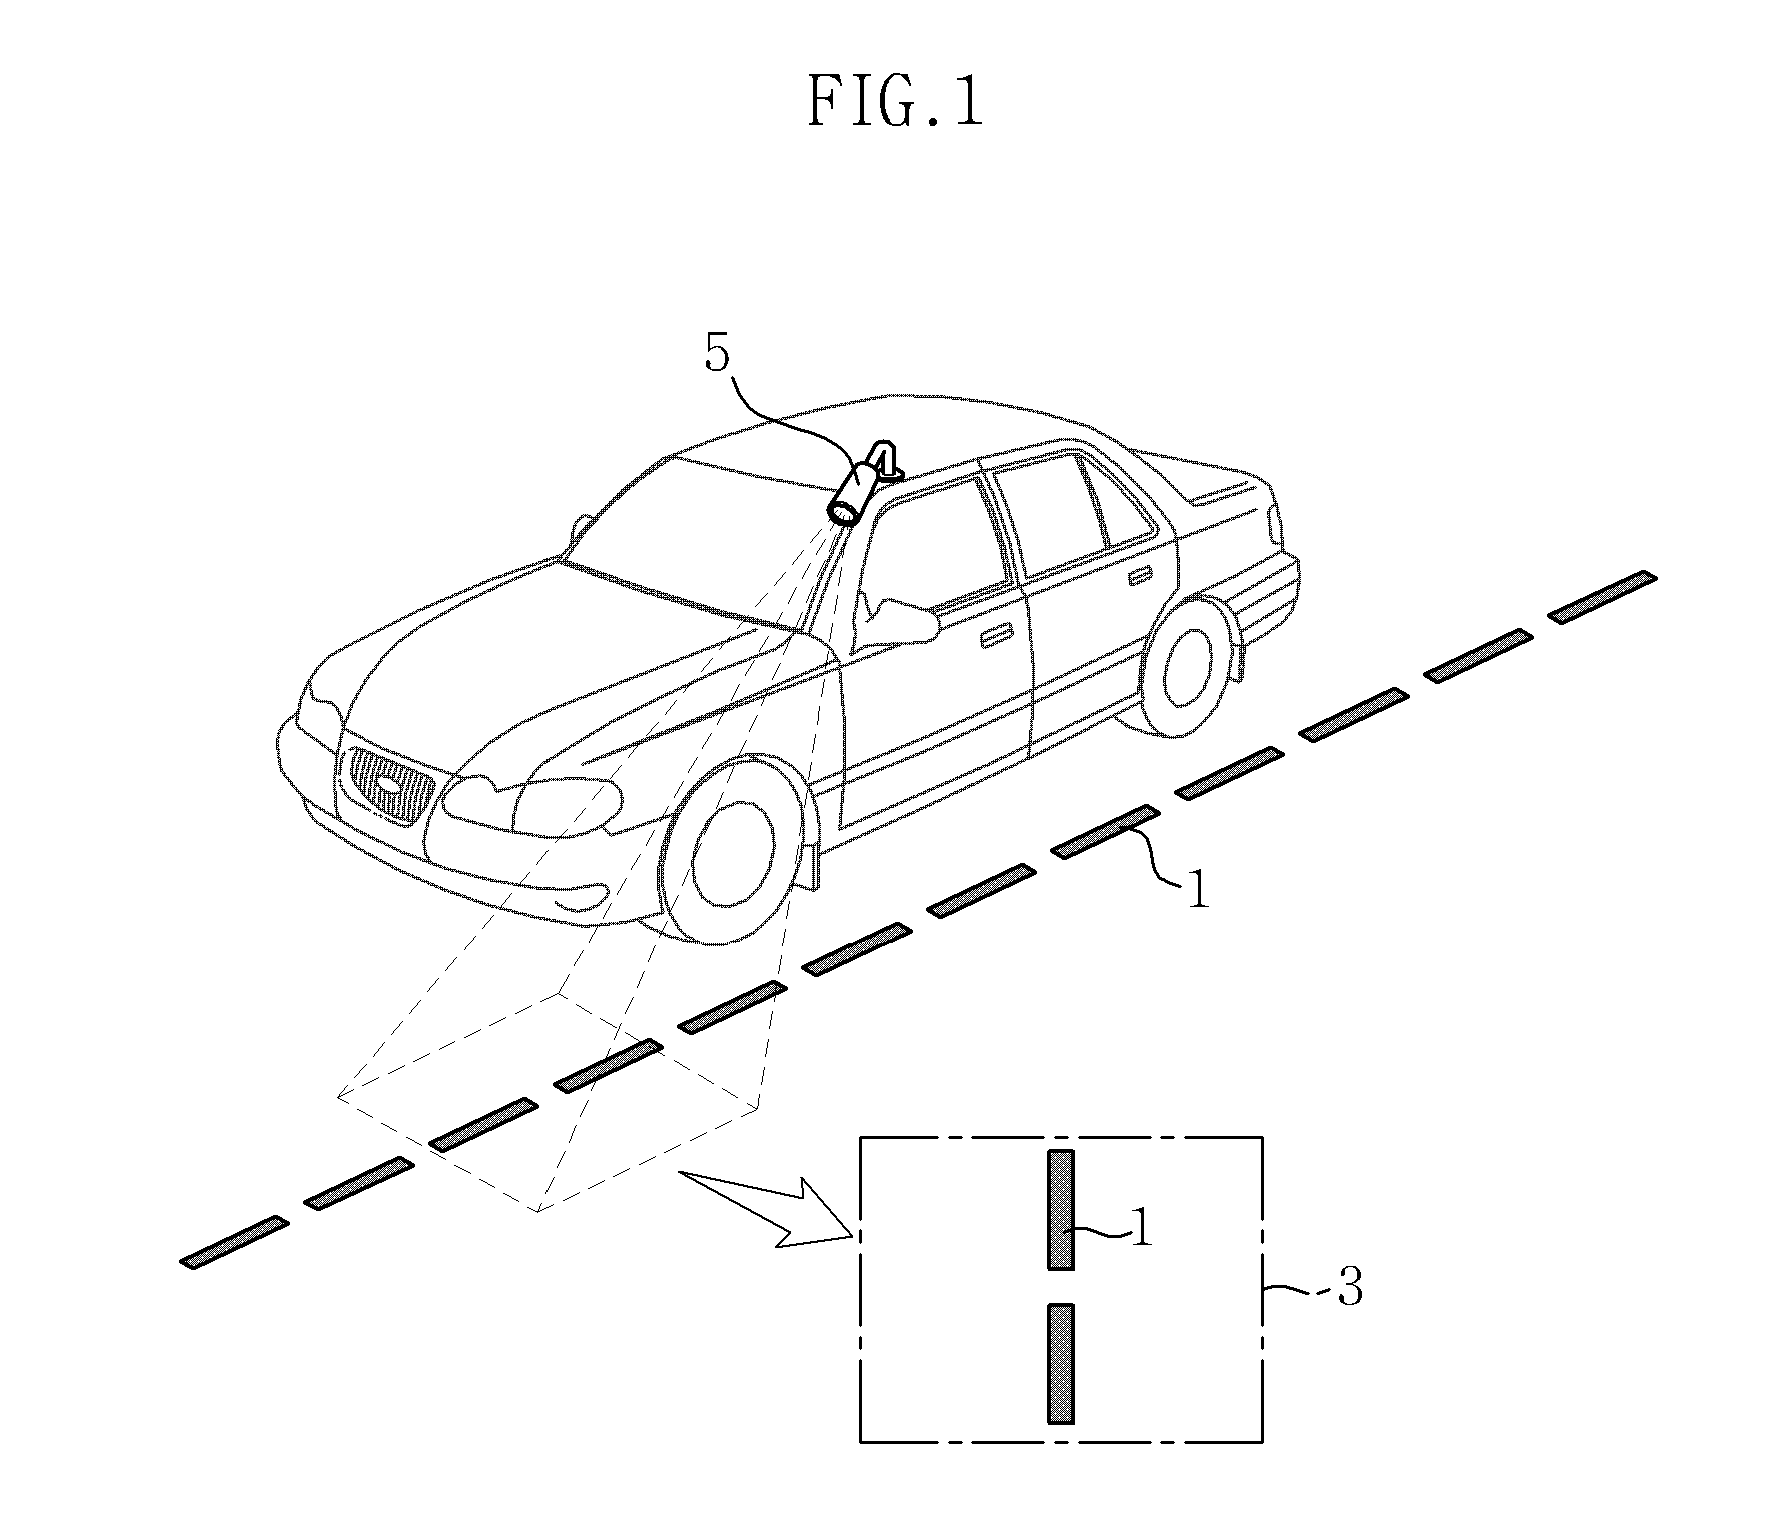 Apparatus for keeping a traffic lane and preventing lane-deviation for a vehicle and method thereof